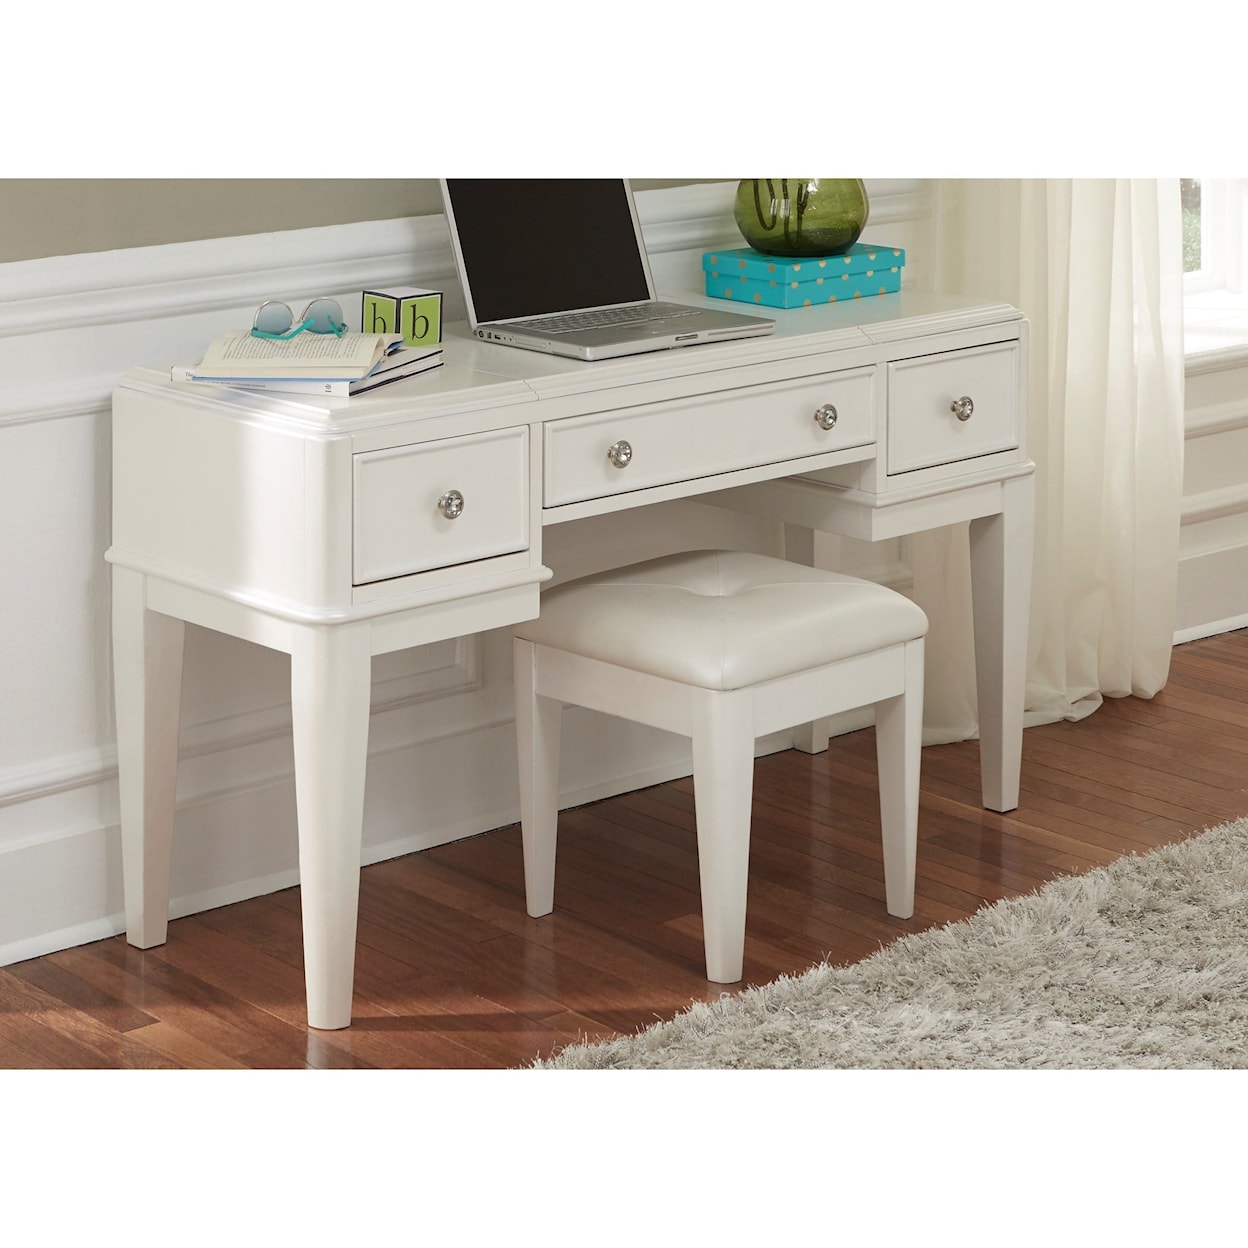 Liberty Furniture Stardust Upholstered Square Vanity Bench